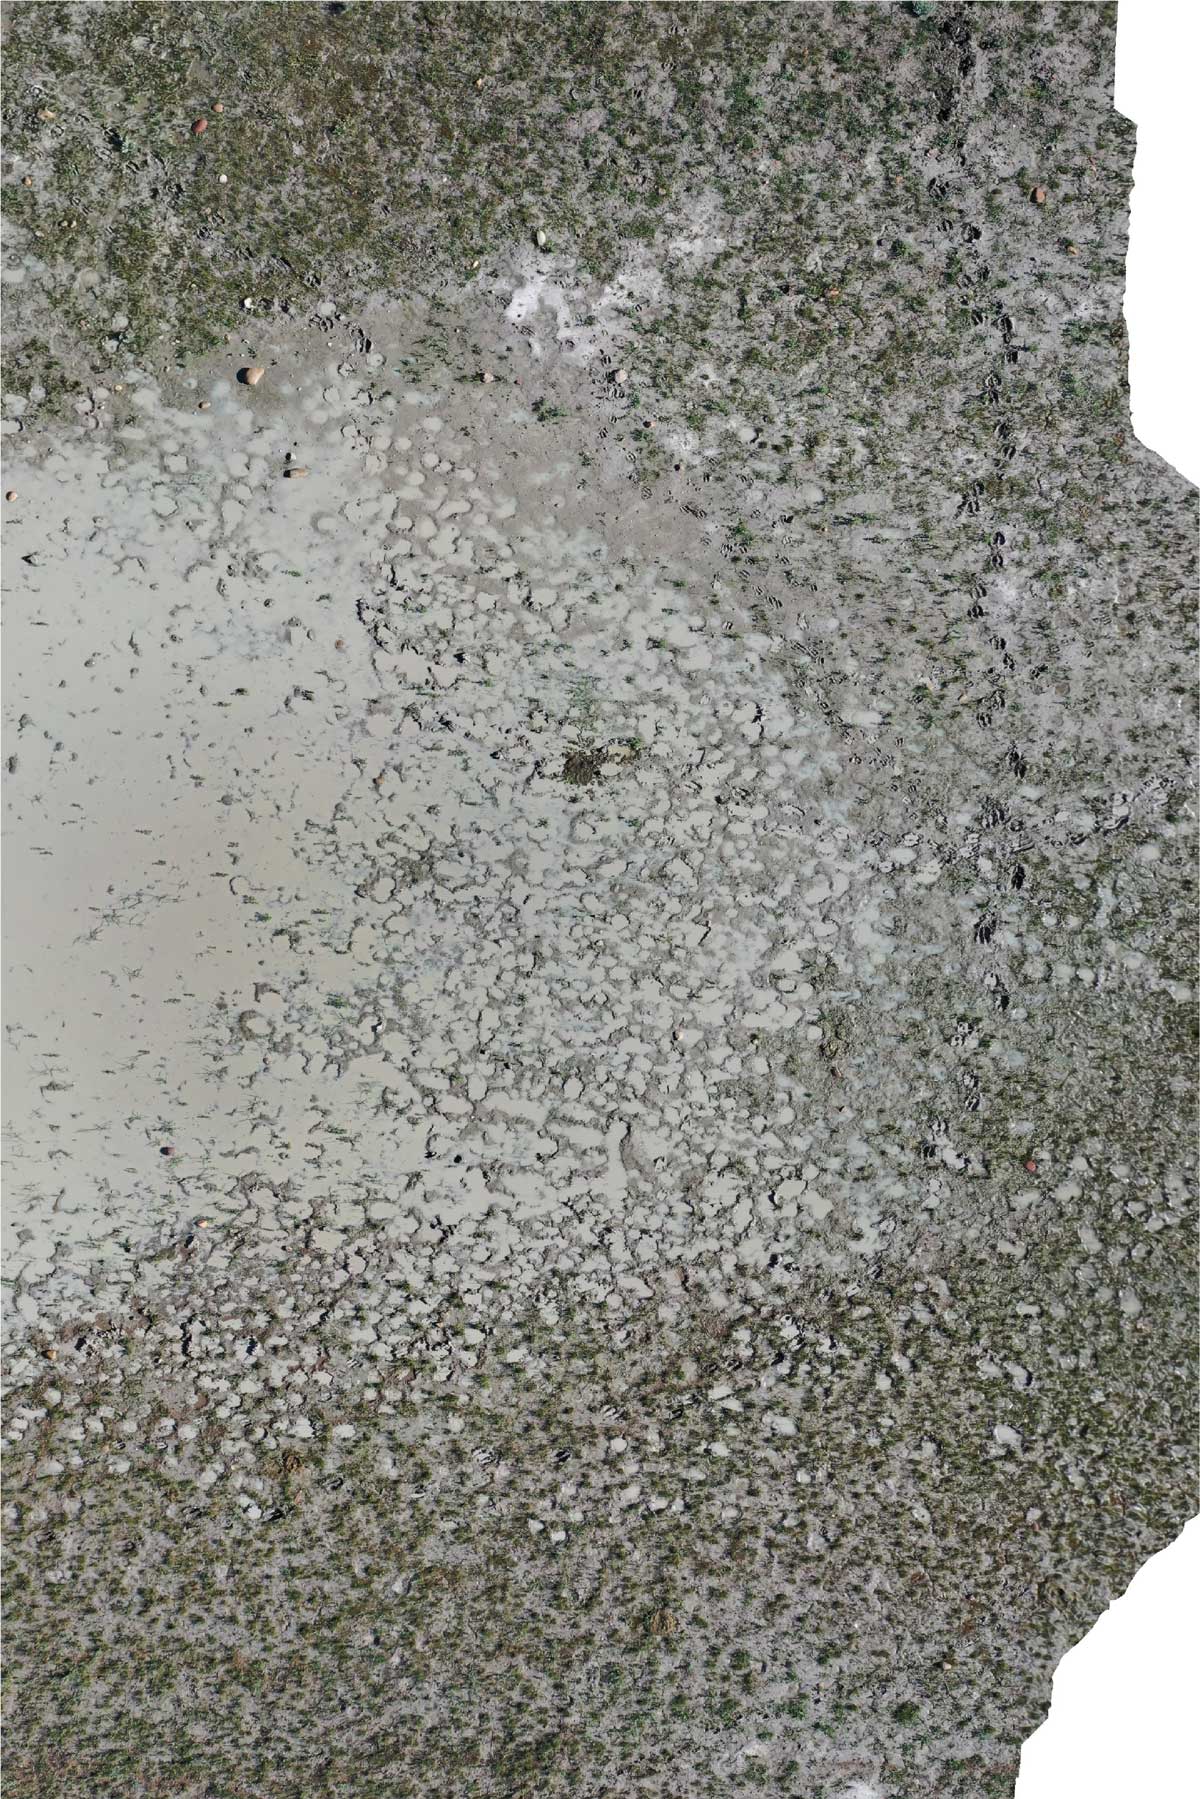 This picture is an orthomosaic of animal trackways that occur around an ephemeral lake in Cypress County taken from a drone.